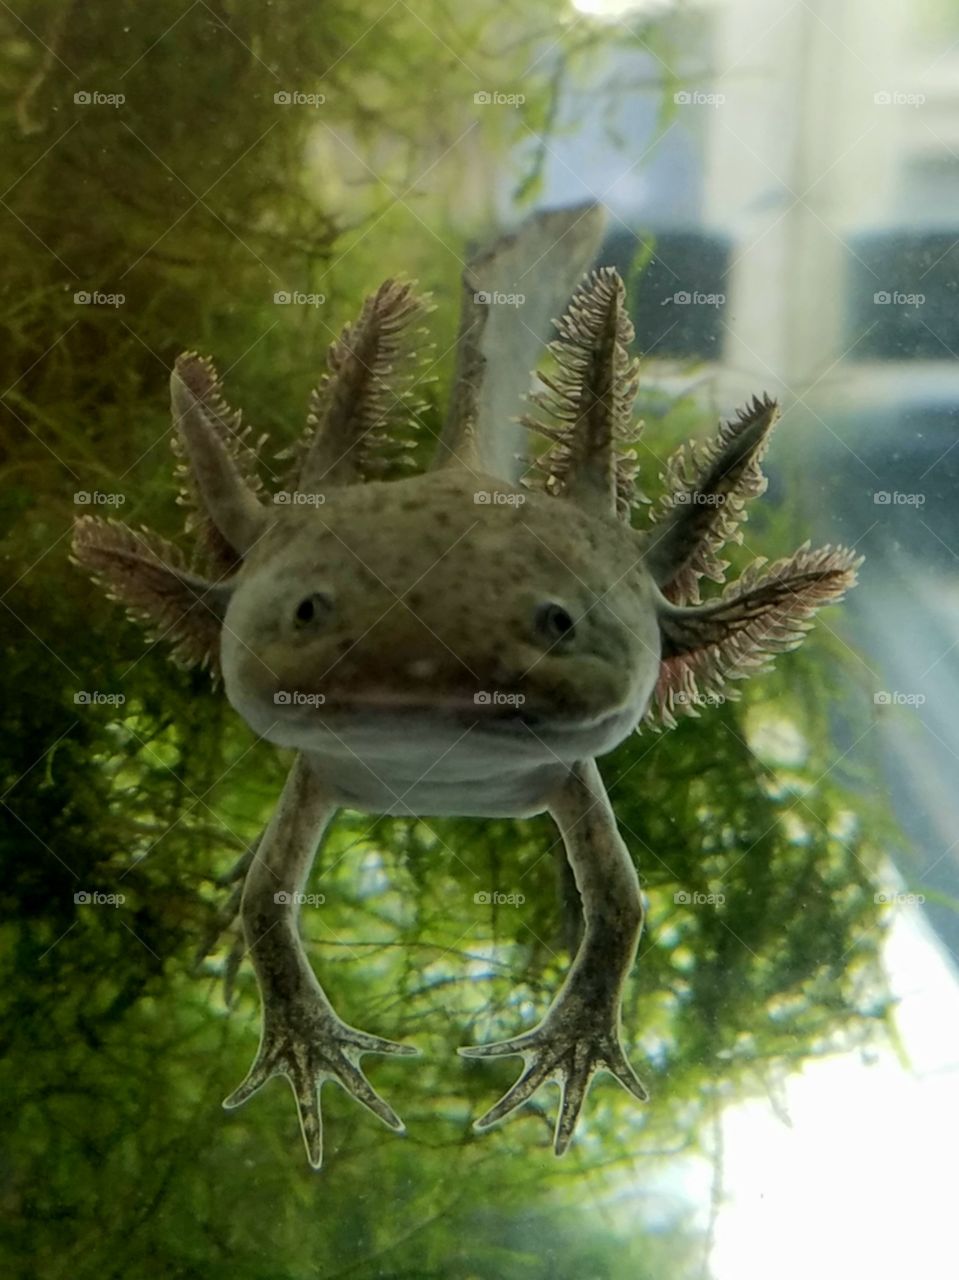 Axolotl - Mexican salamander that lives in water for life and can breed. They breathe through the skin, gills and has lungs. They don't bite and are not dangerous. People have them as pets and are kept in fishtanks.